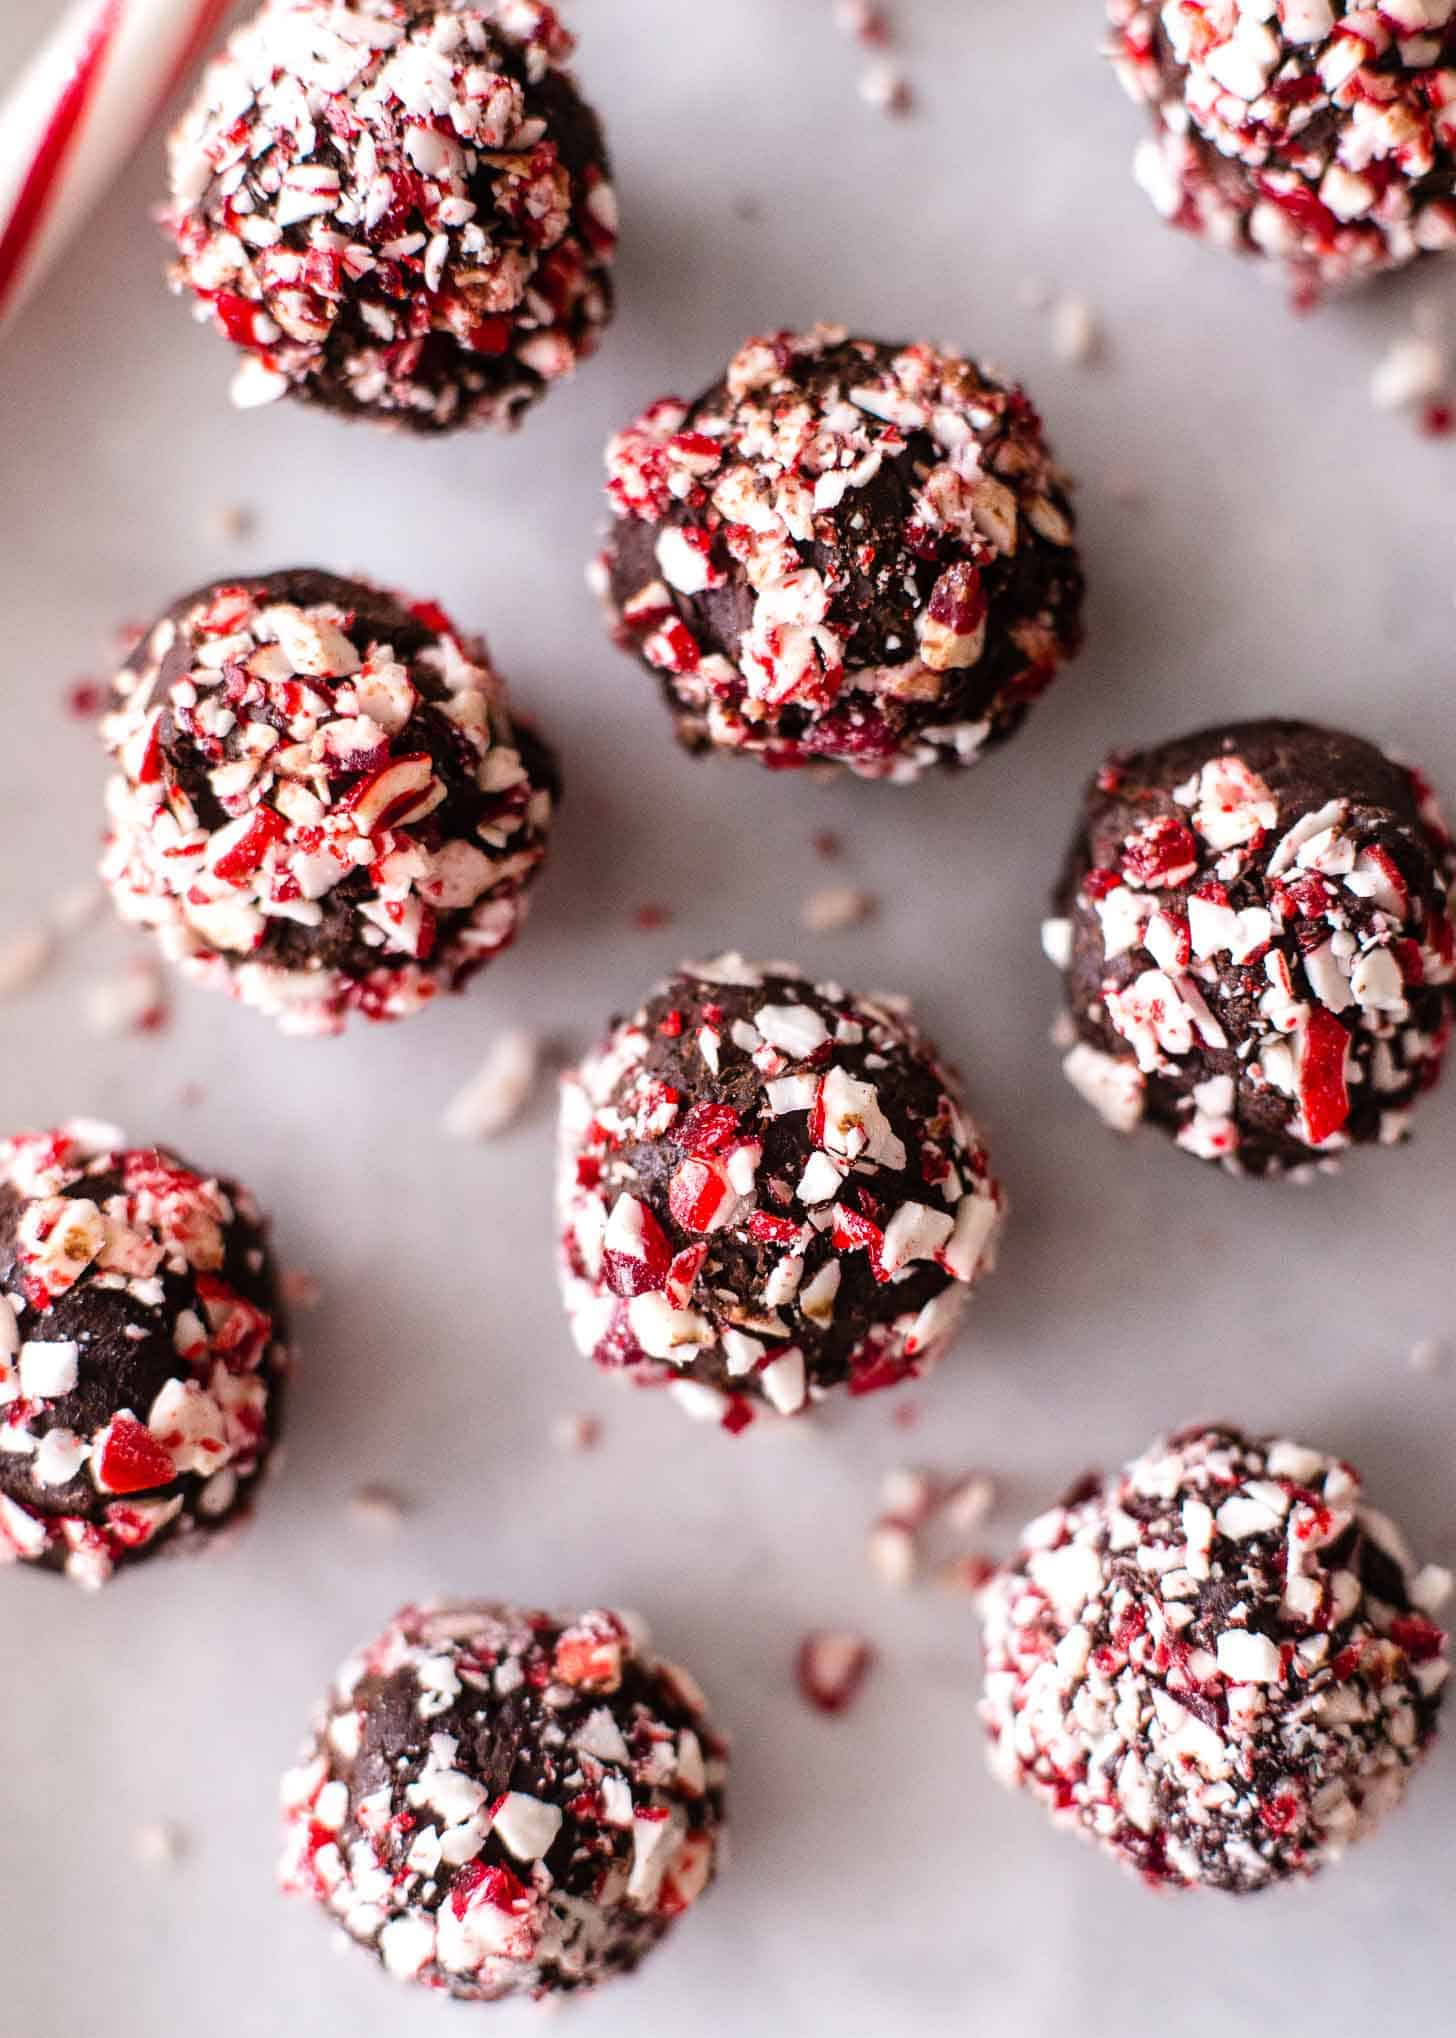 Chocolate Candy Cane Truffle on a sheet of parchment paper